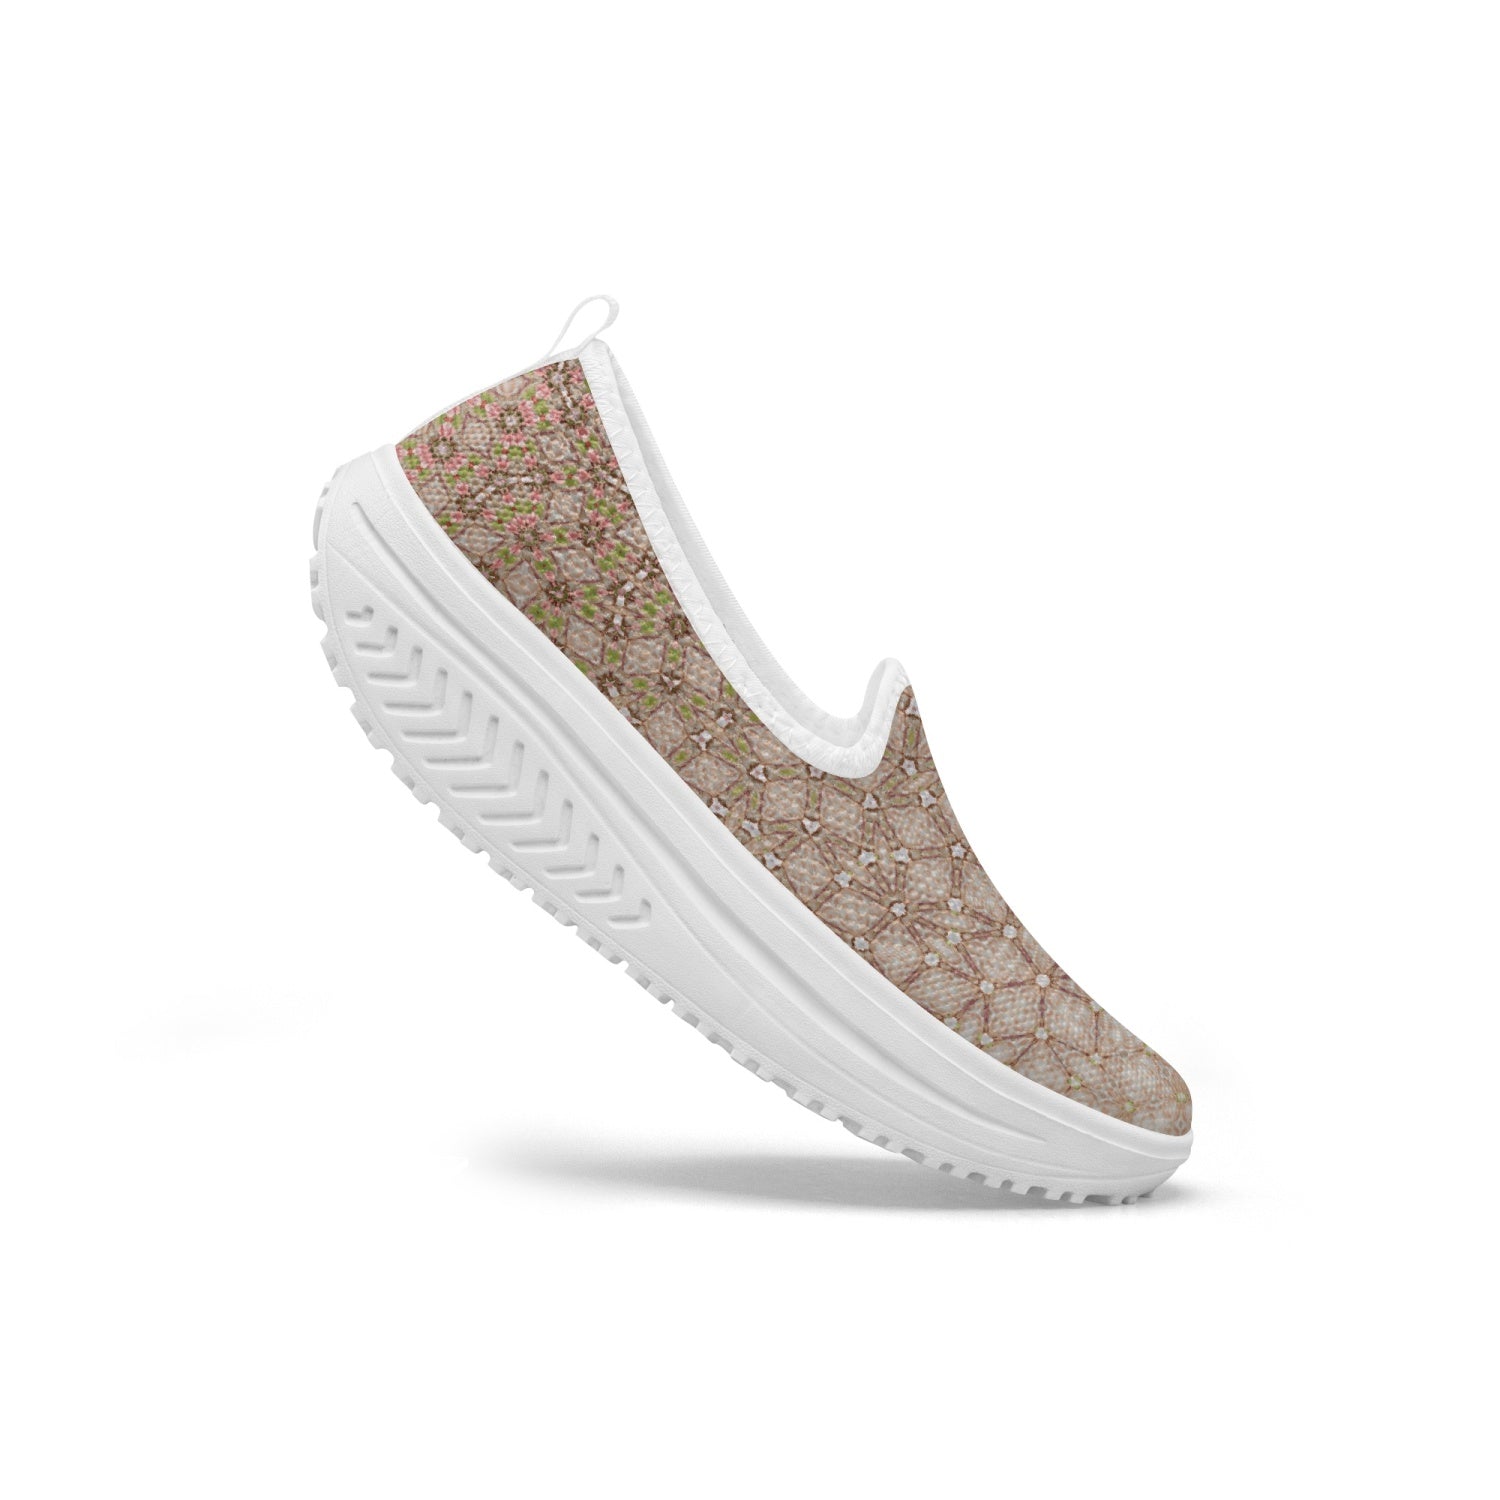 Delicate Pale Pink & Beige Rosy patterned Women's Slip-On Mesh Rocking Shoes, by Sensus Studio Design